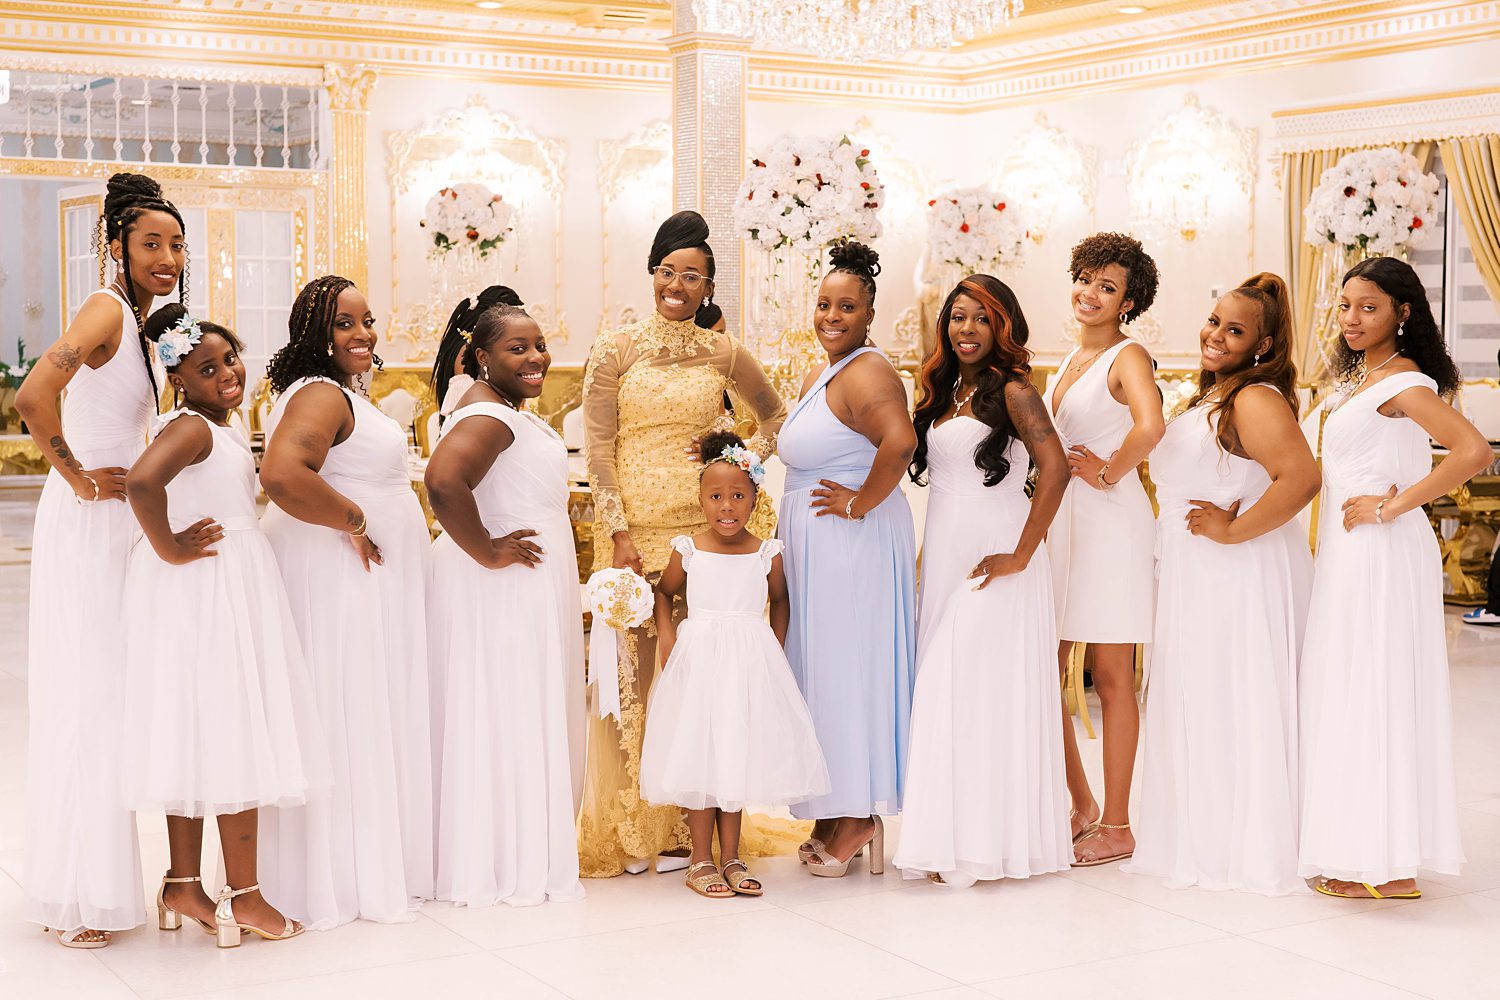 bride poses with bridesmaids in white gowns and maid of honor in blue gown